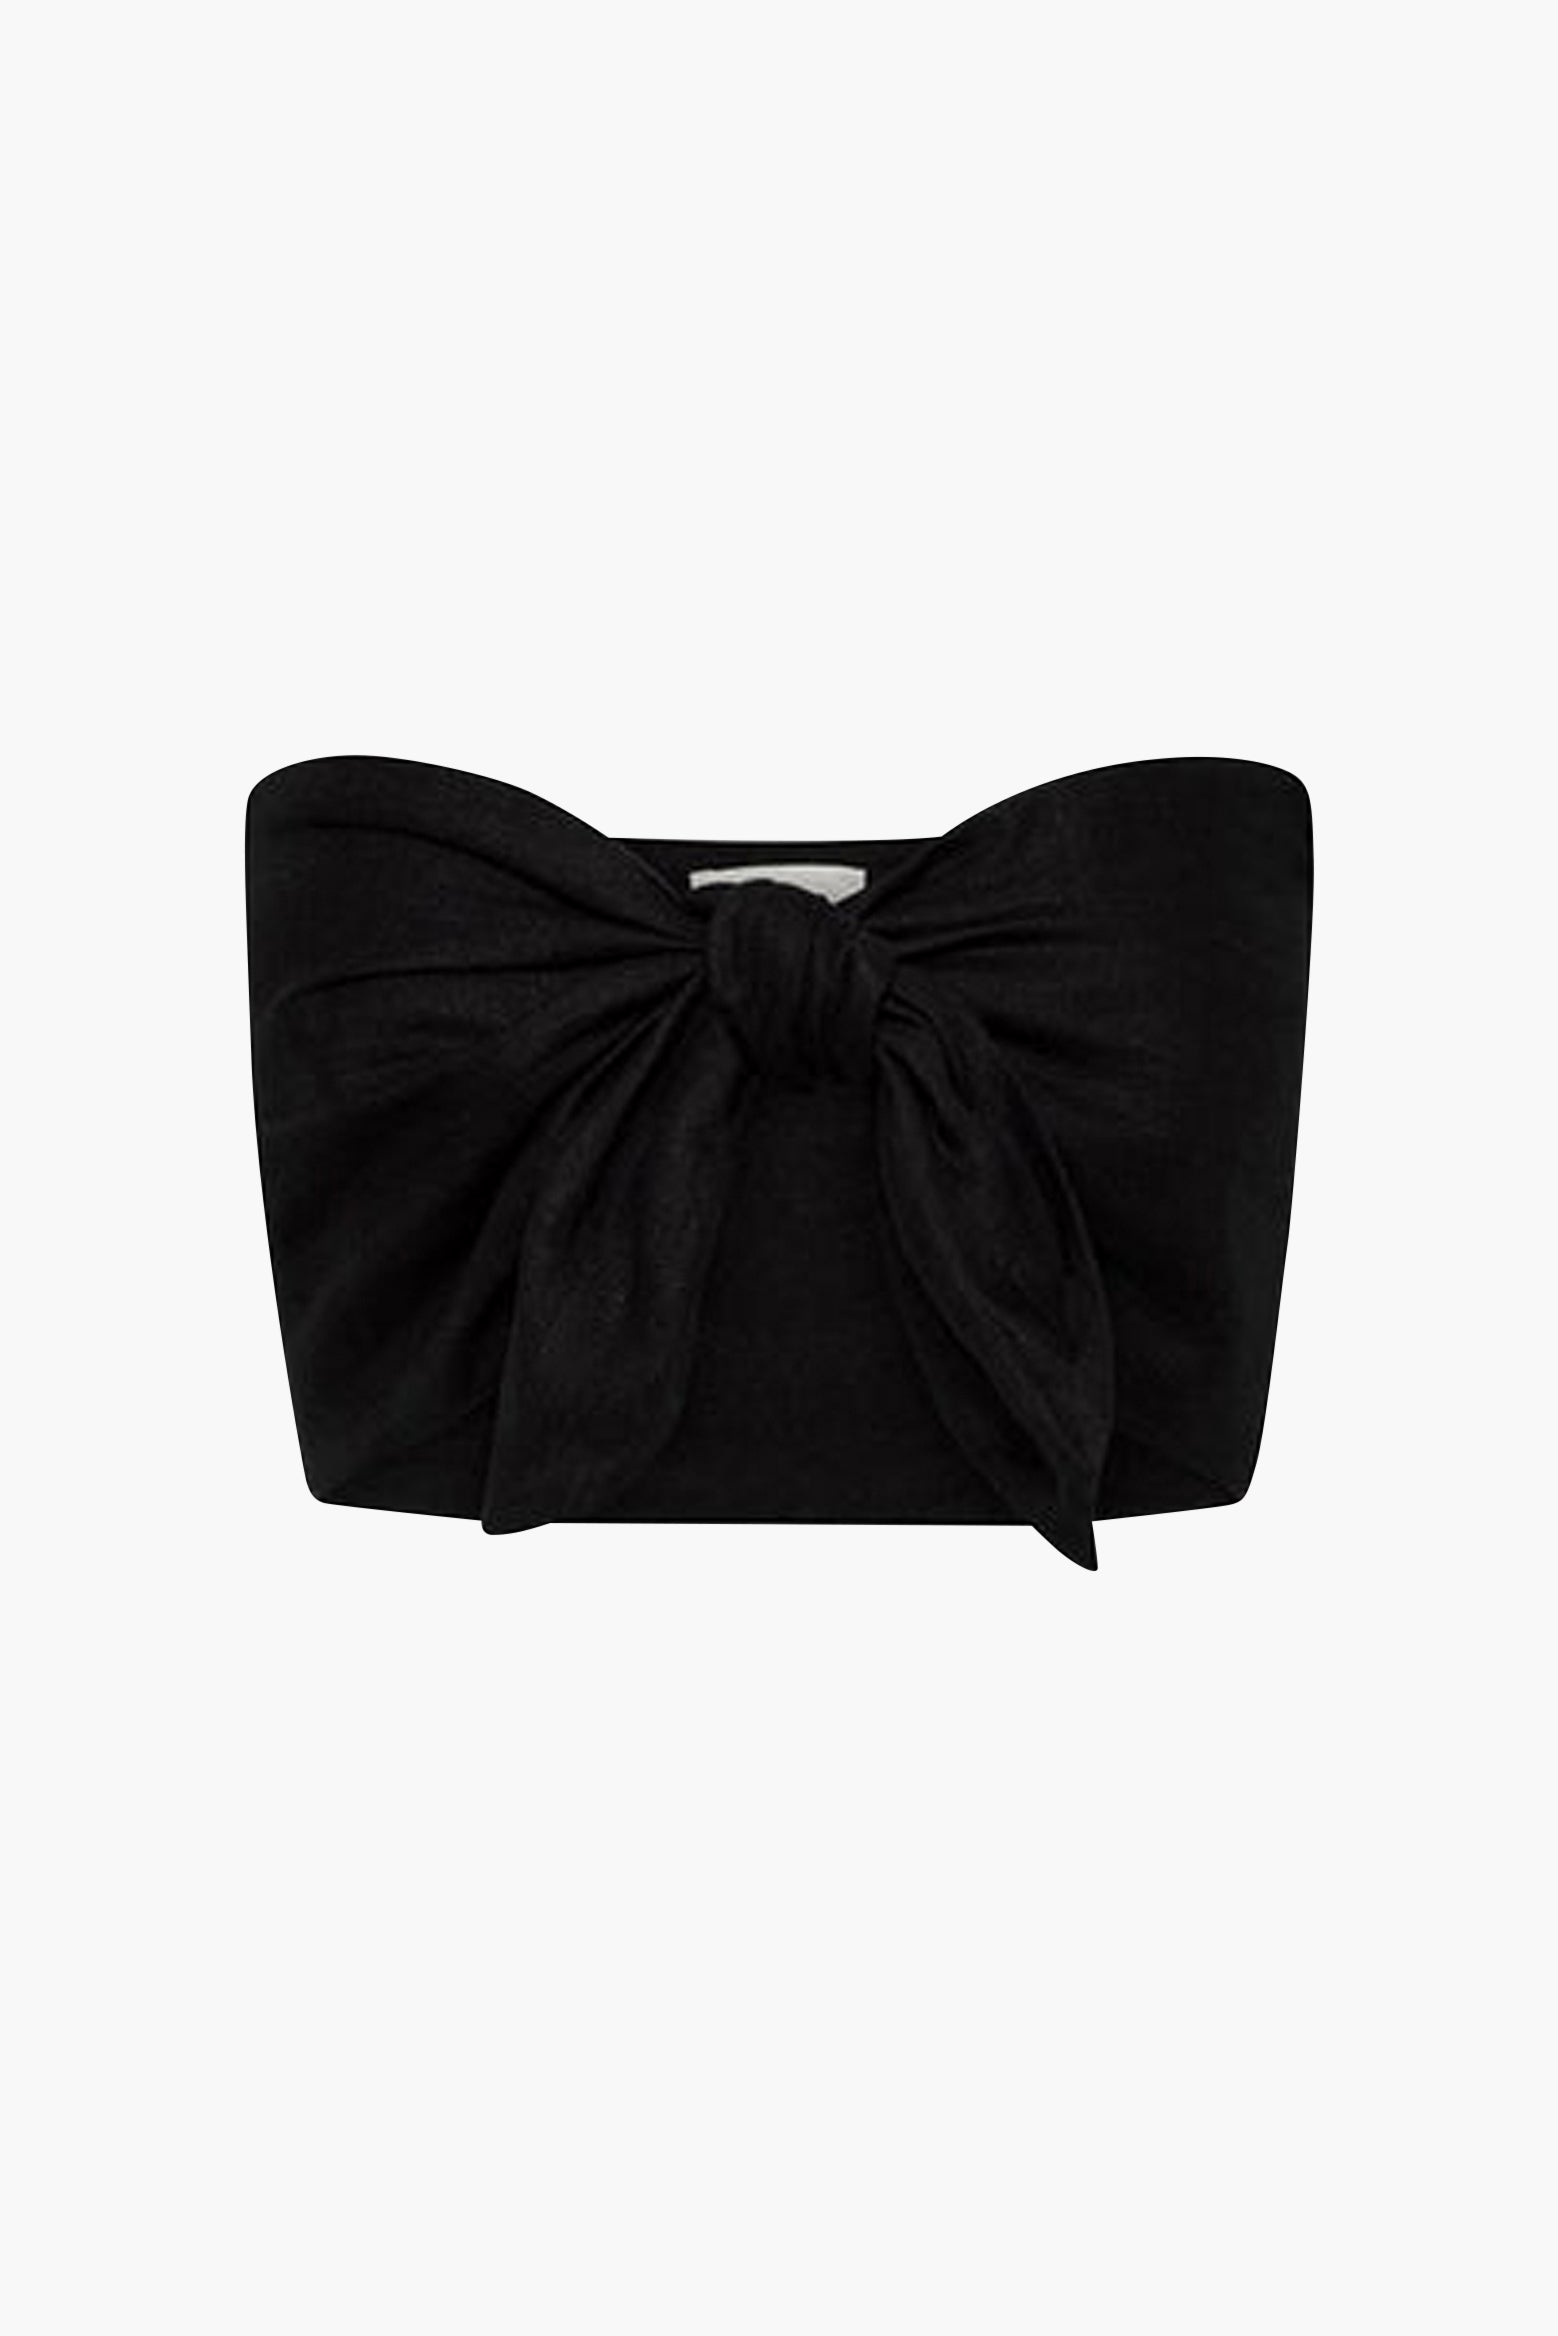 Posse Micky Bandeau in Black available at TNT The New Trend Australia